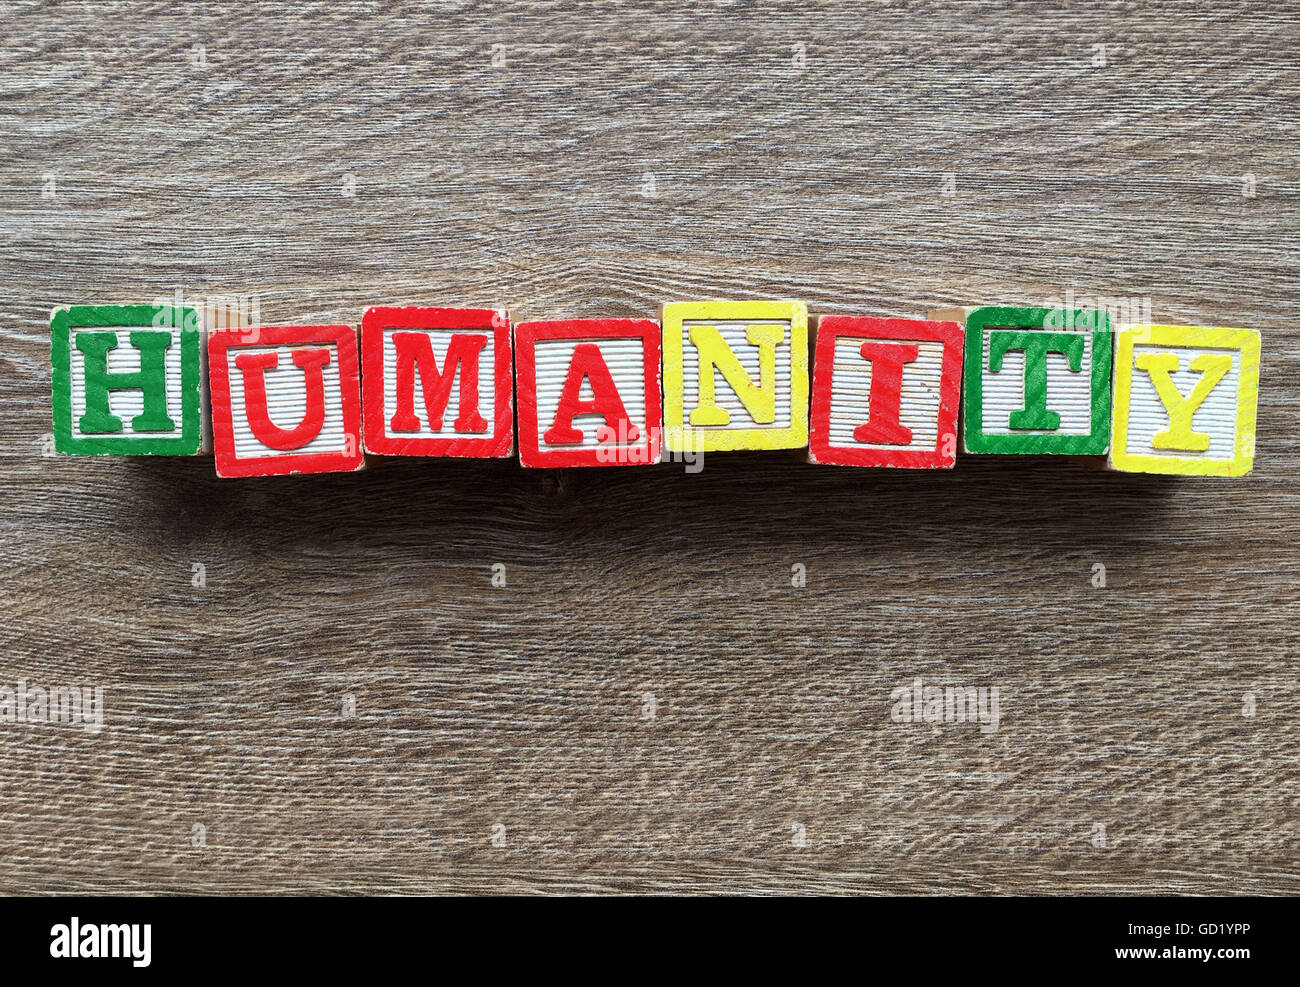 Humanity word written with wood block letter toys Stock Photo